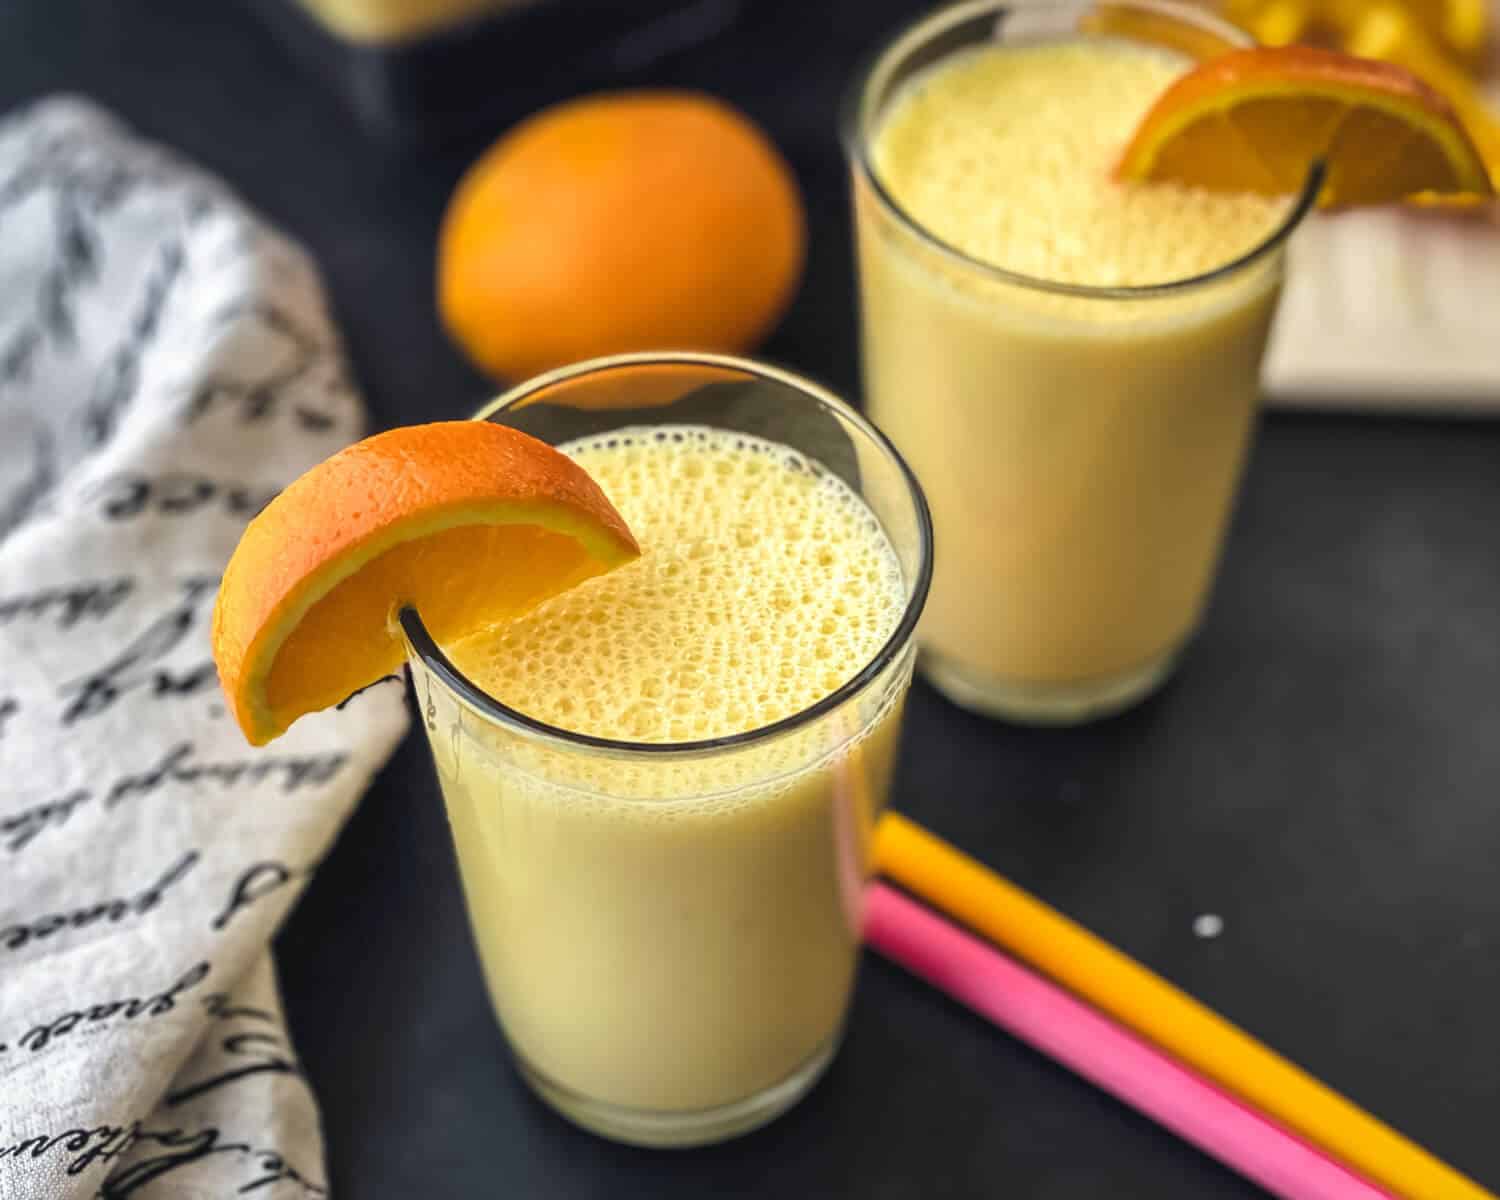 Two glasses of orange smoothie with an orange slice on the rim, two straws in between, and an orange in the back.